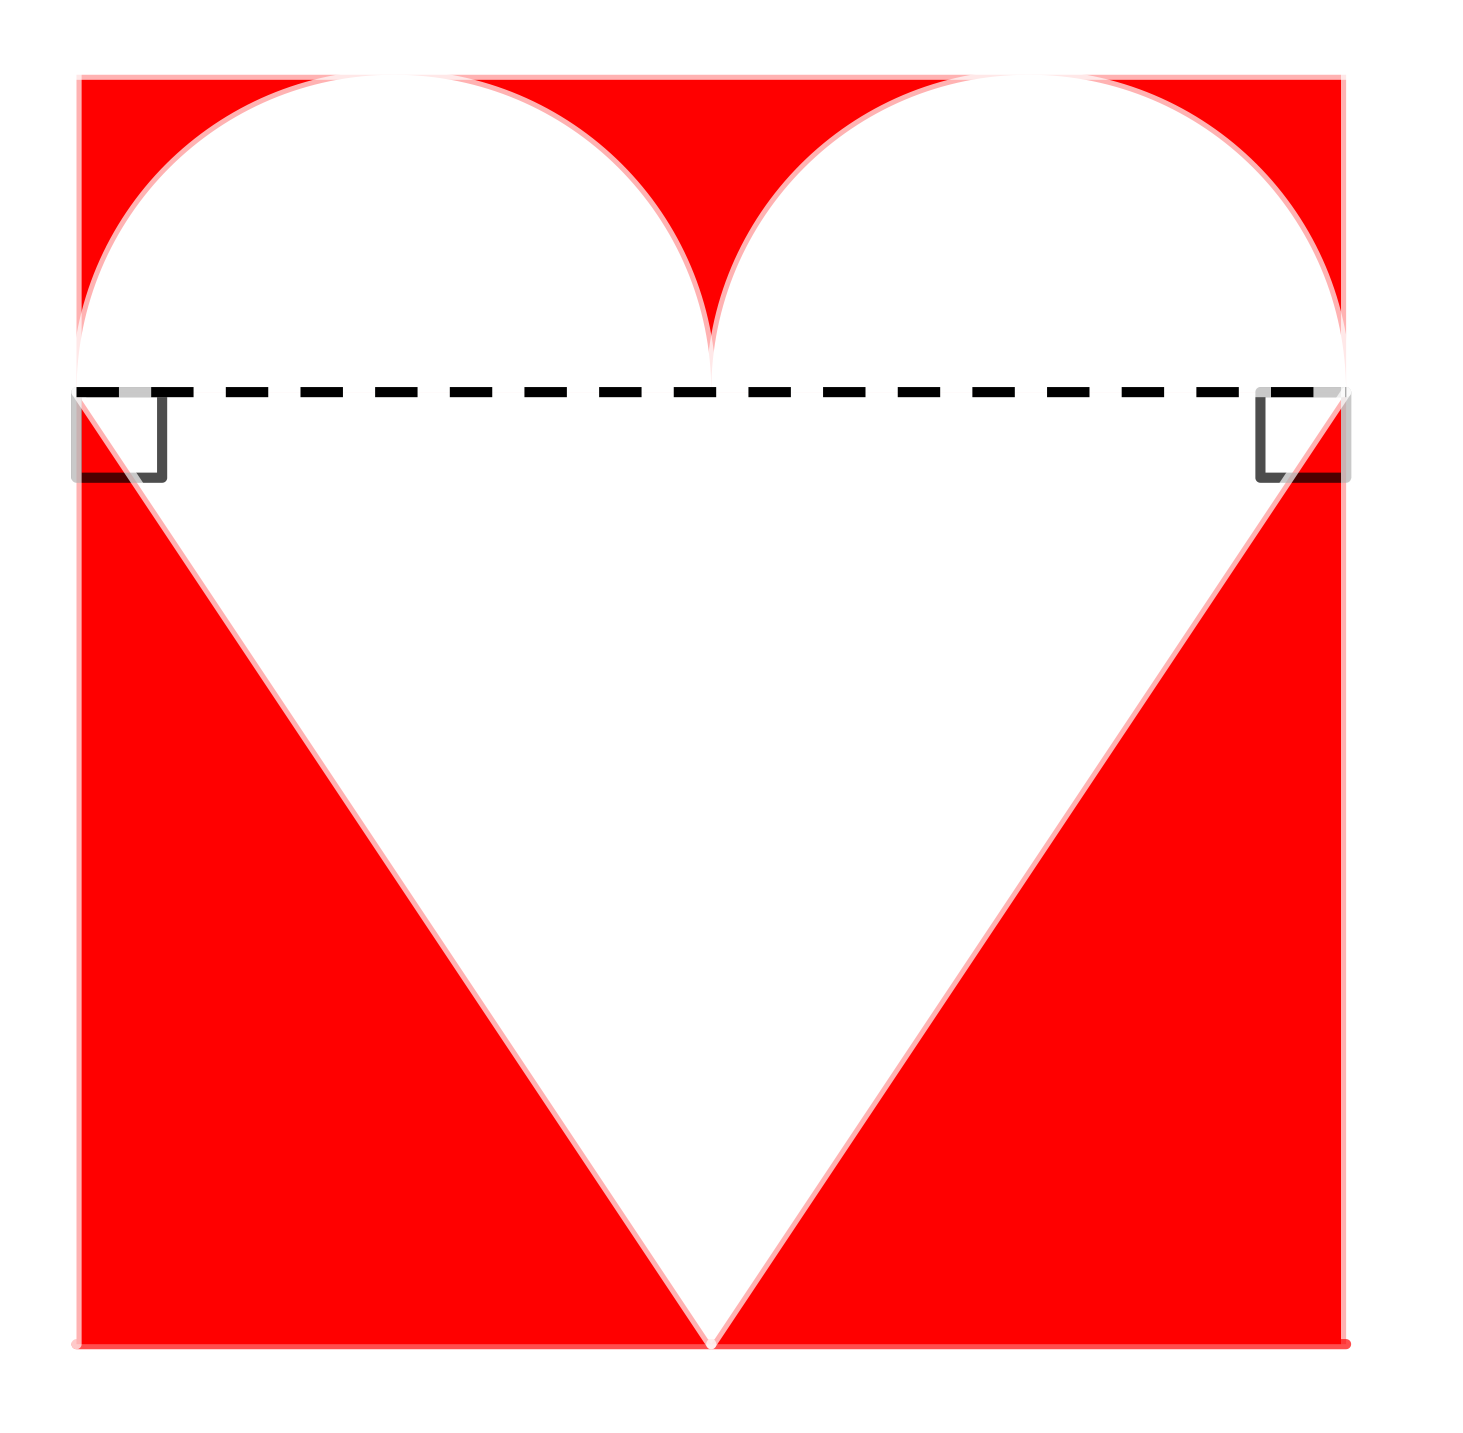 A red square with a white heart-shaped region in its interior. A dashed horizontal line runs the width of the heart which is the same as the width of the square. The line decomposes the heart into two semi-circles lying side by side and a triangle. The top of the semi-circles touch the top edge of the square, and the bottom vertex of the triangle touches the middle of the bottom edge of the square.